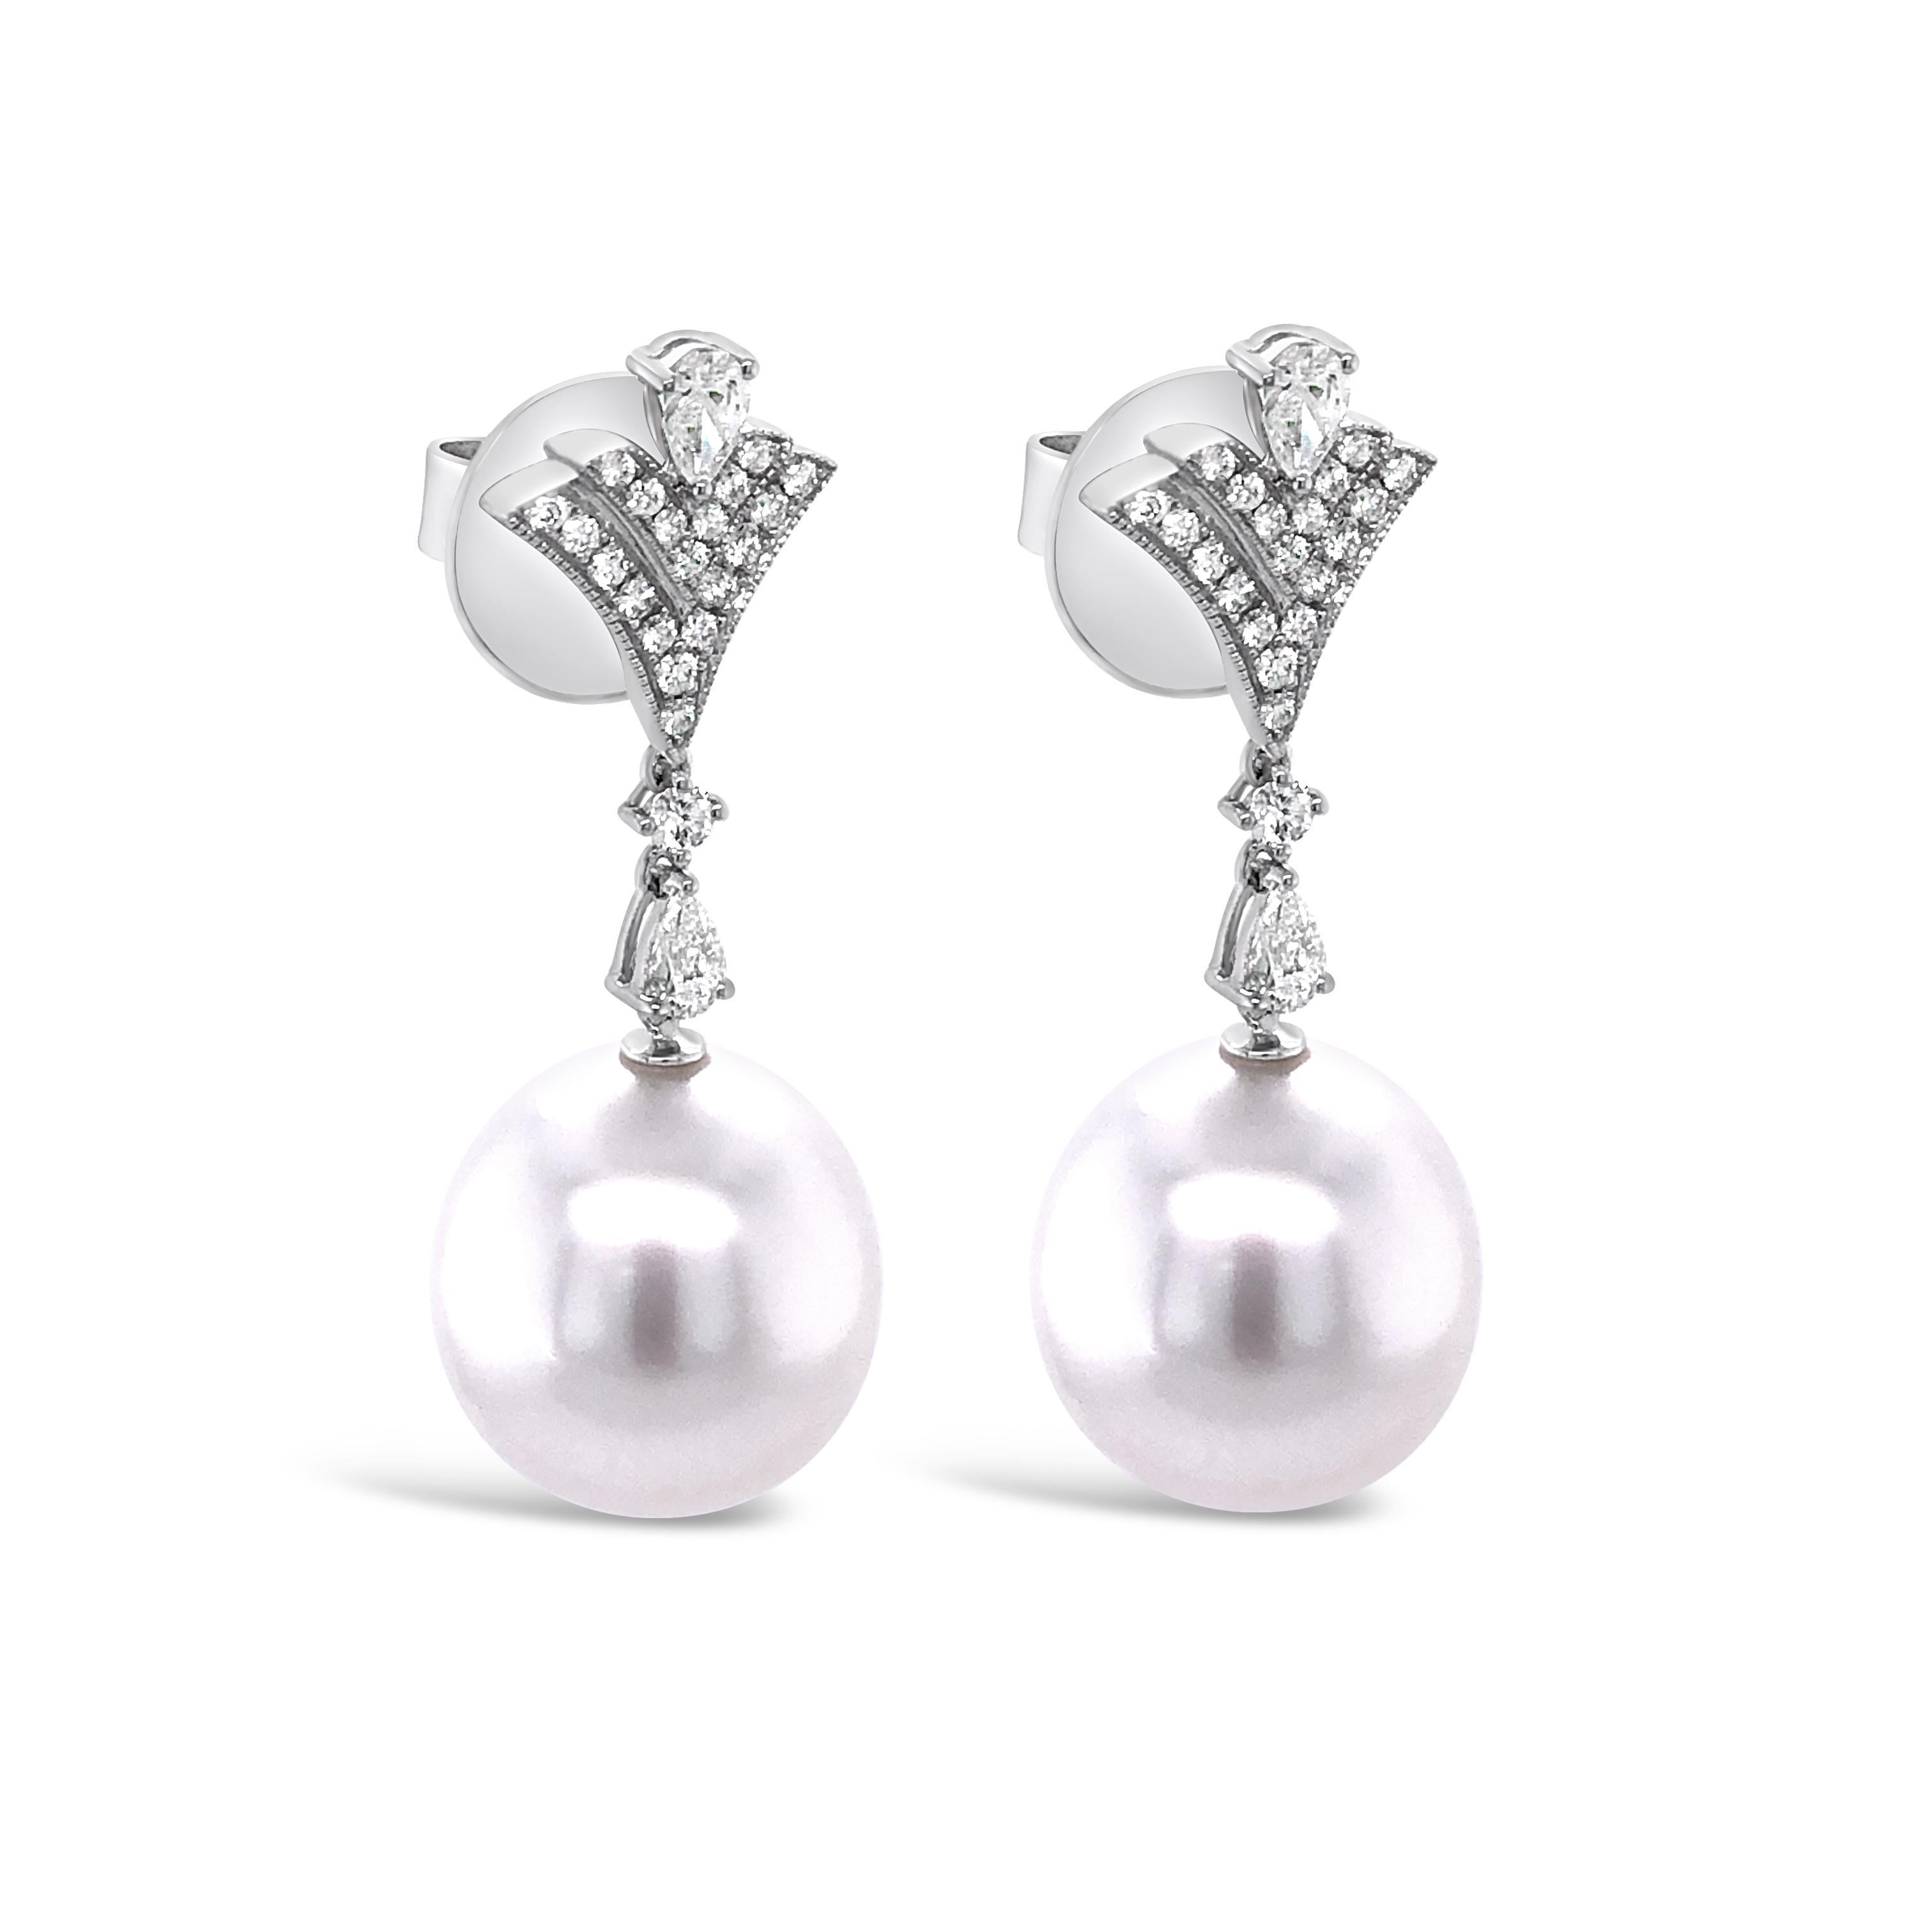 These Kailis 18ct white gold earrings feature 13-14mm south sea pearls, accompanied by round brilliant cut diamonds totalling 0.81ct. 

These elegant pearl and diamond drop earrings are manufactured by Kailis. Kailis, an Australian brand, opened